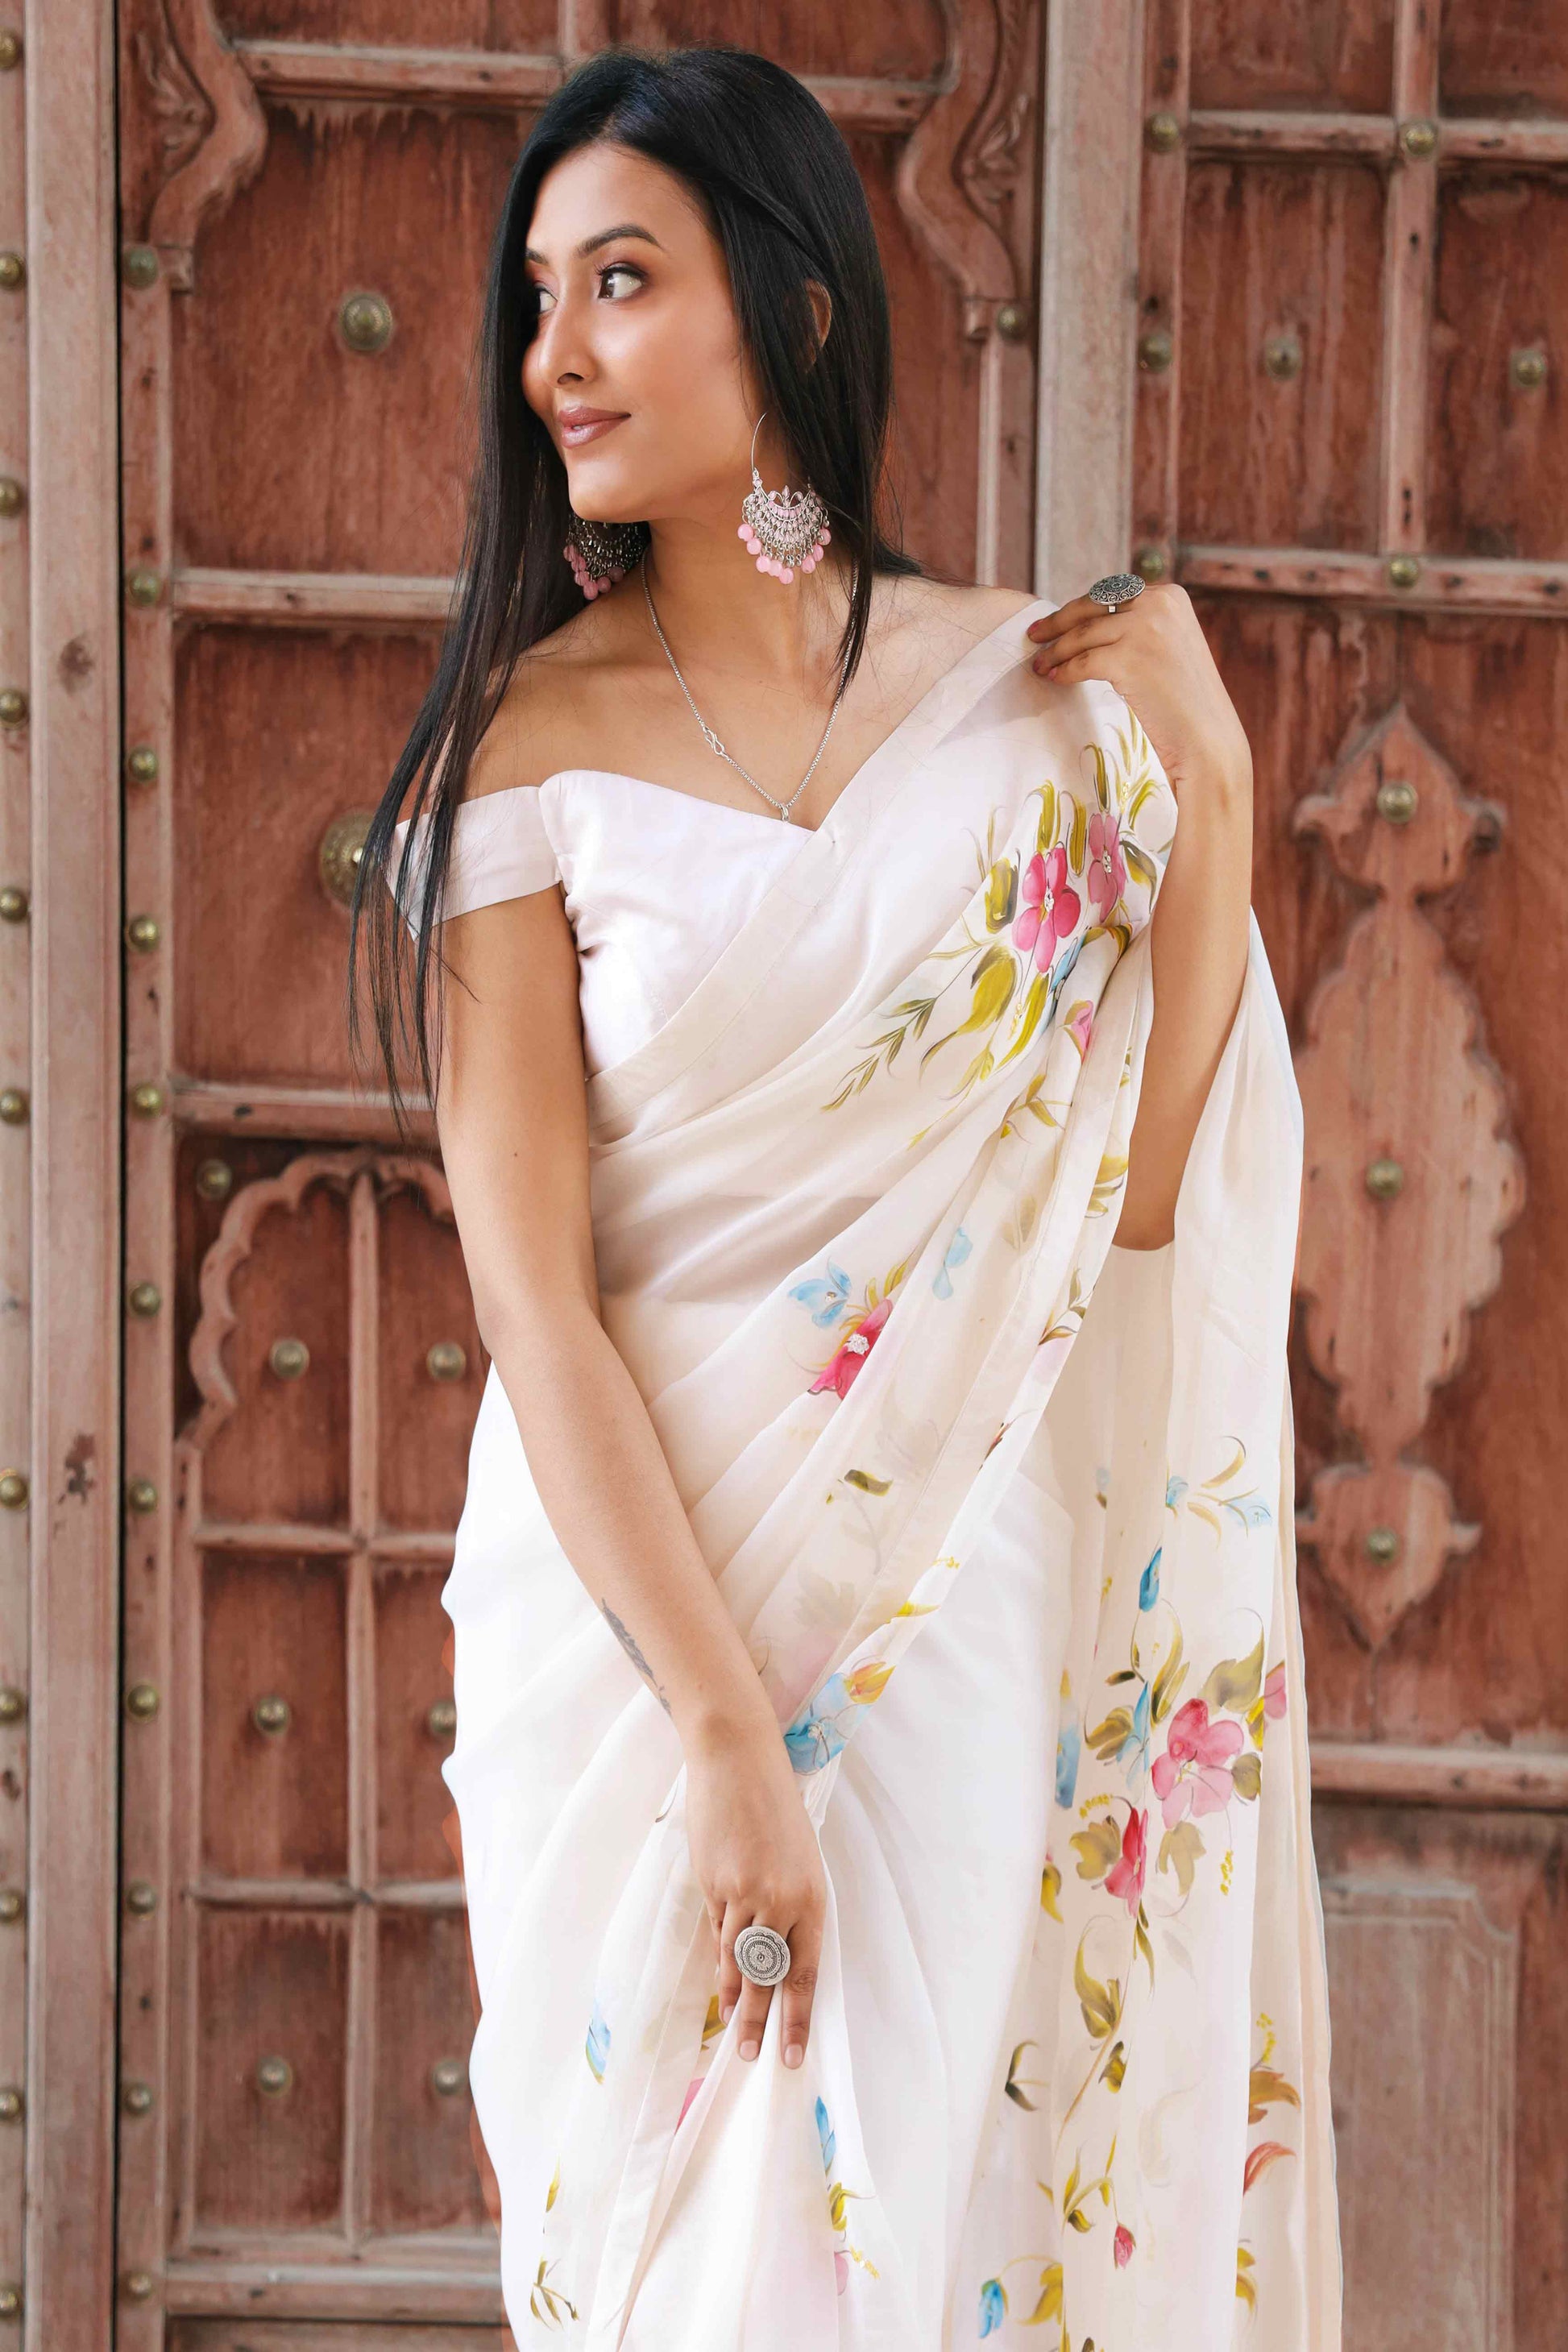 Off-White Organza Saree with Hand-Painted Multi-Color Flowers and Sequin Embroidery - Perfect for a Party, Farewell, or Any Occasion - Latest Saree Blouse Designs - Organza Saree Party Wear - Floral Organza Saree - Easy Hand-Painted Saree Design - Hand Painting on Saree - Elegant Hand-Painted Saree Look